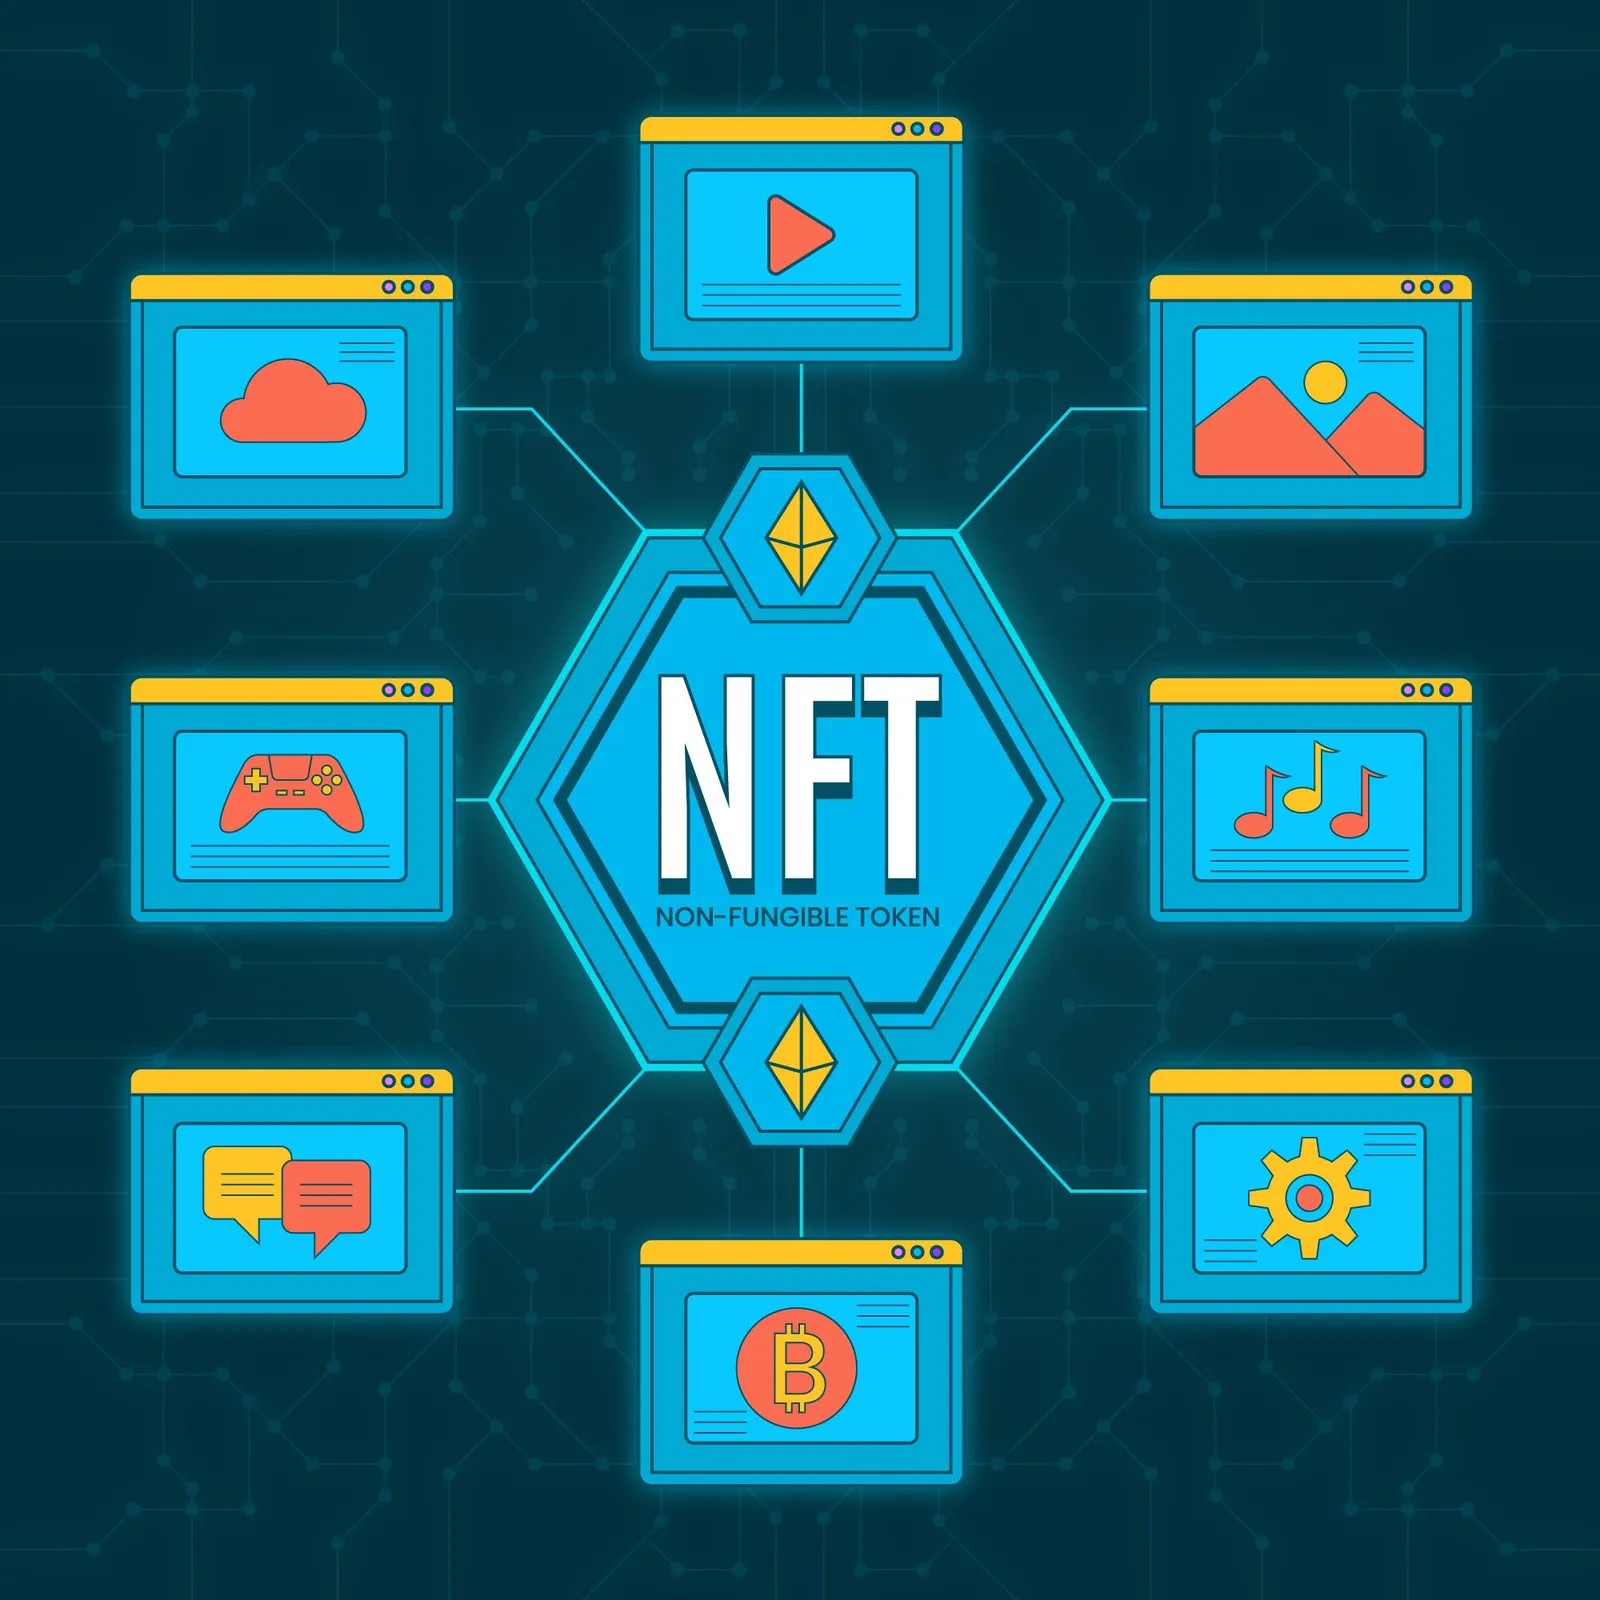 Promote your NFT for great business traction